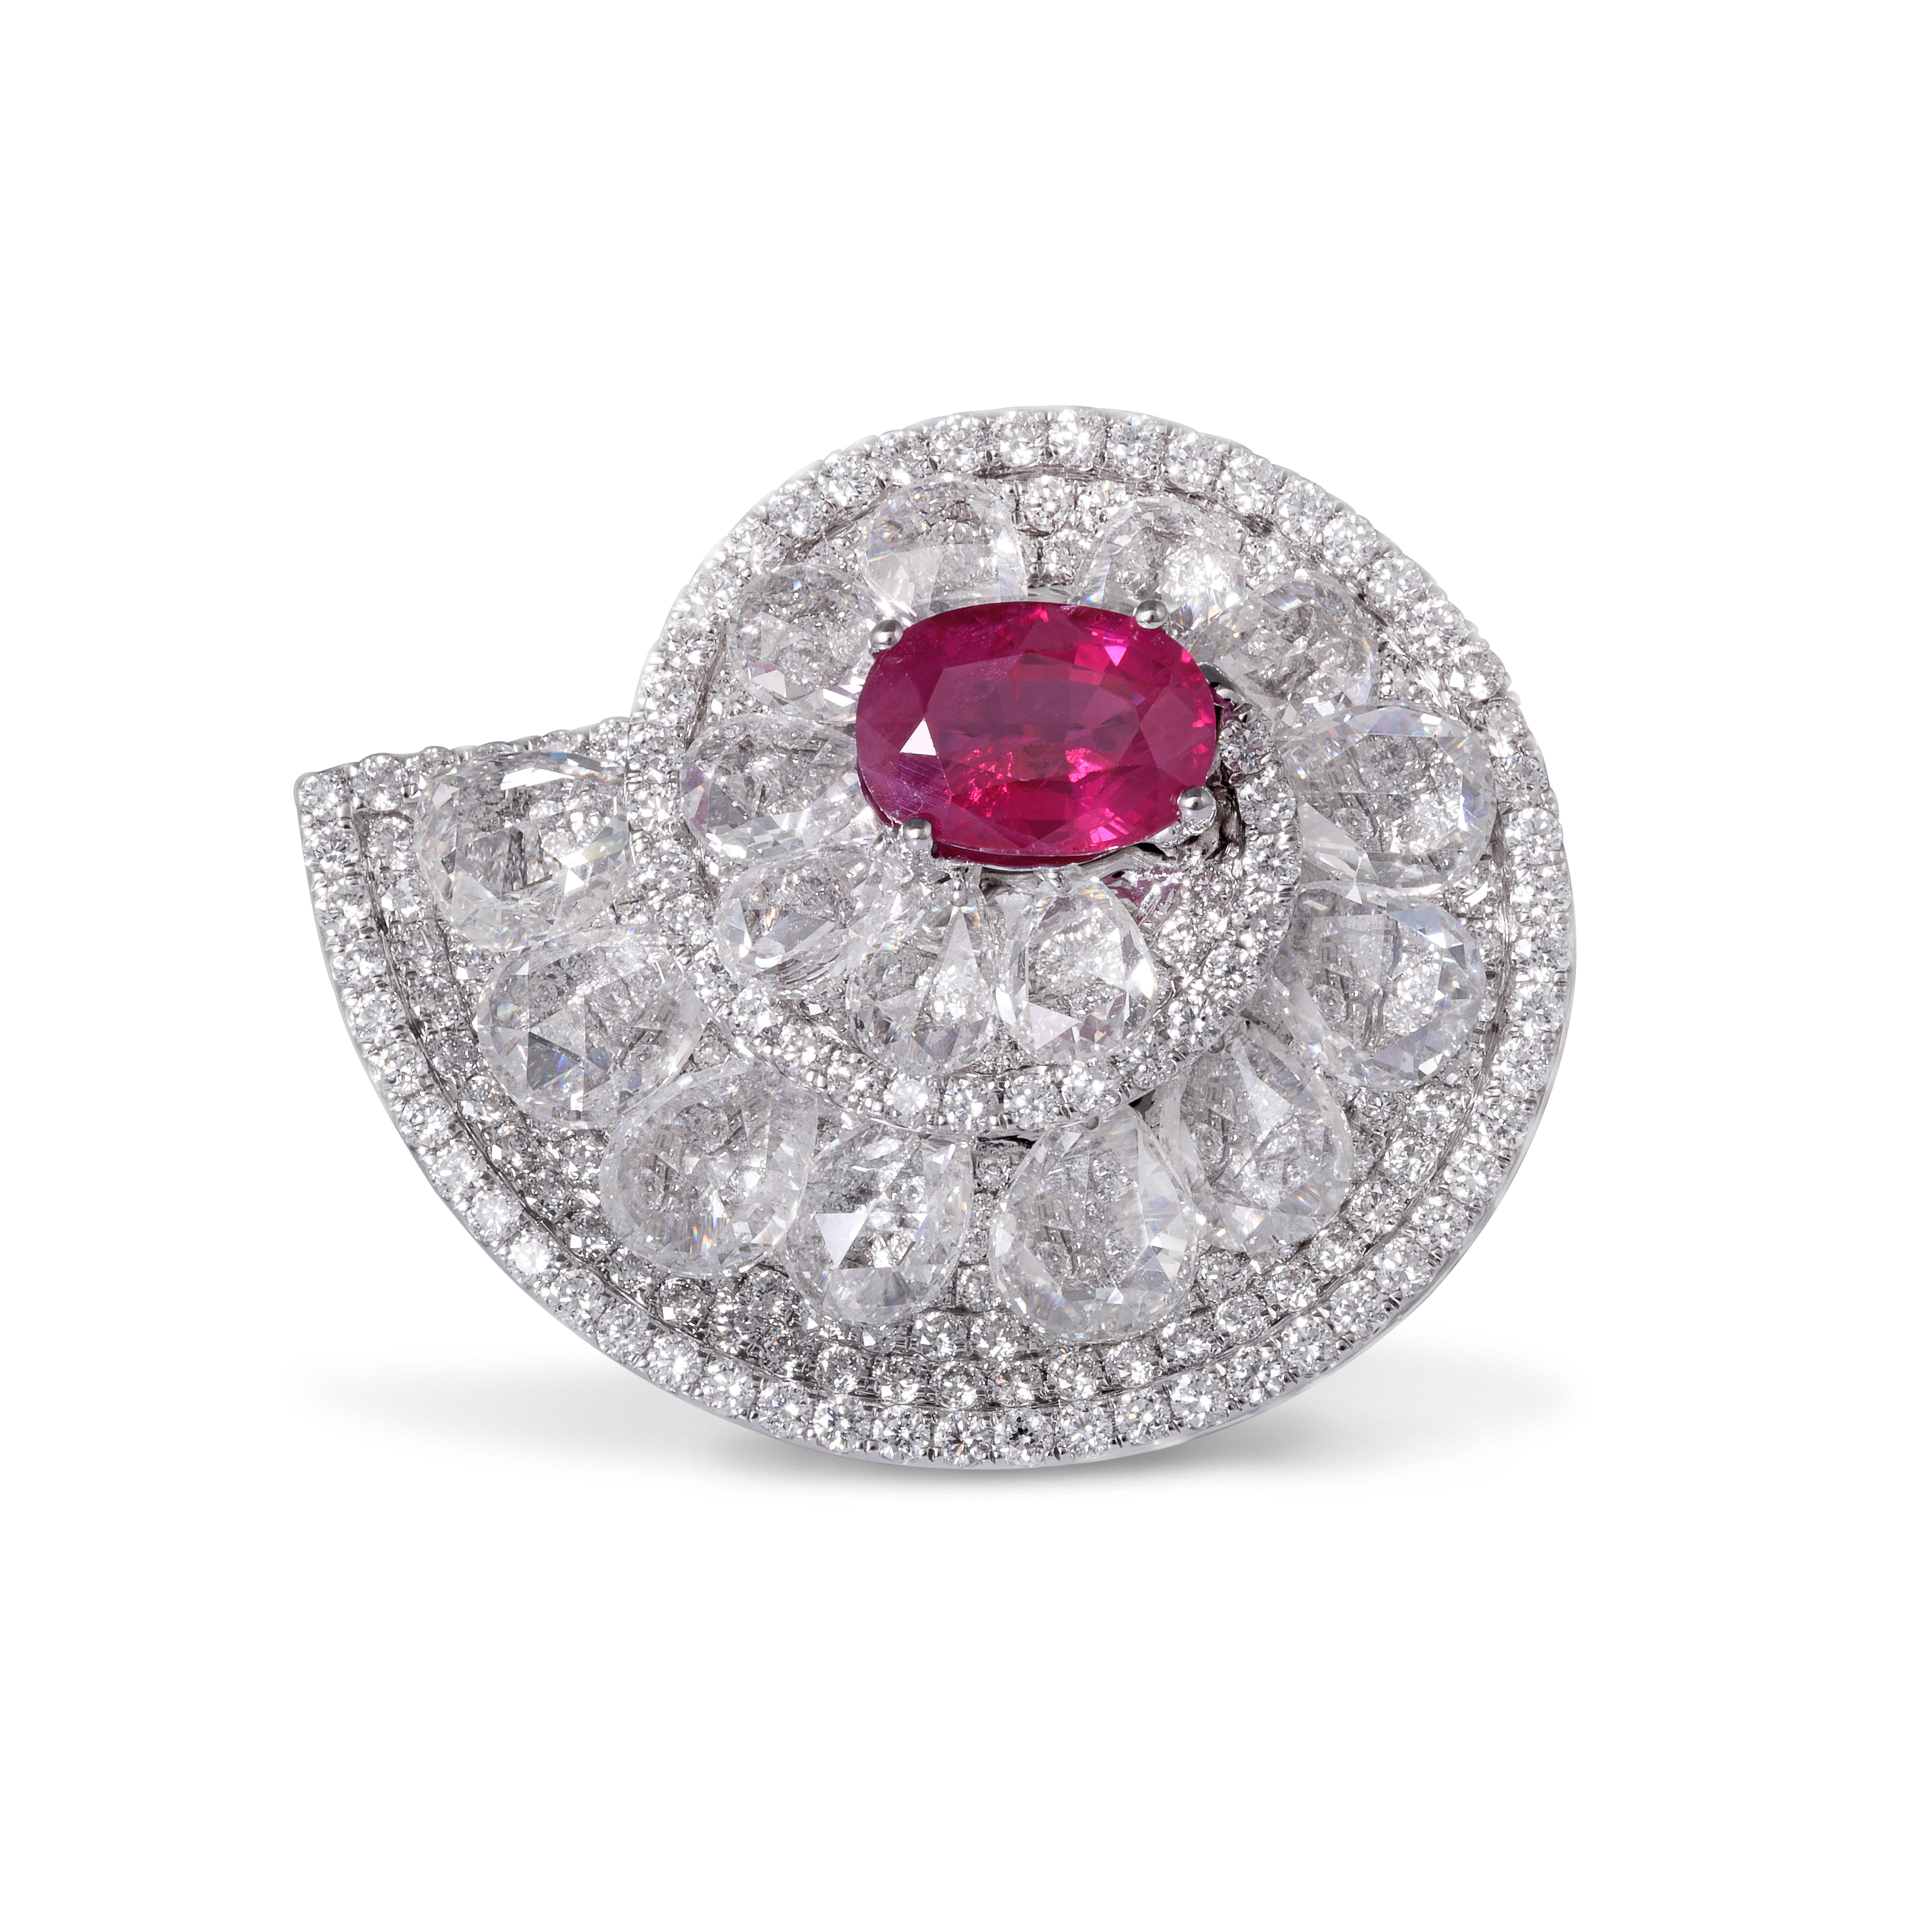 This exquisite jewel, crafted with rose-cut diamonds set in such a way that they move around the central 1.63cts Burmese ruby, creates the perfect shell shape. With its unique combination of colour, symmetry and placement of the rose cuts, this ring